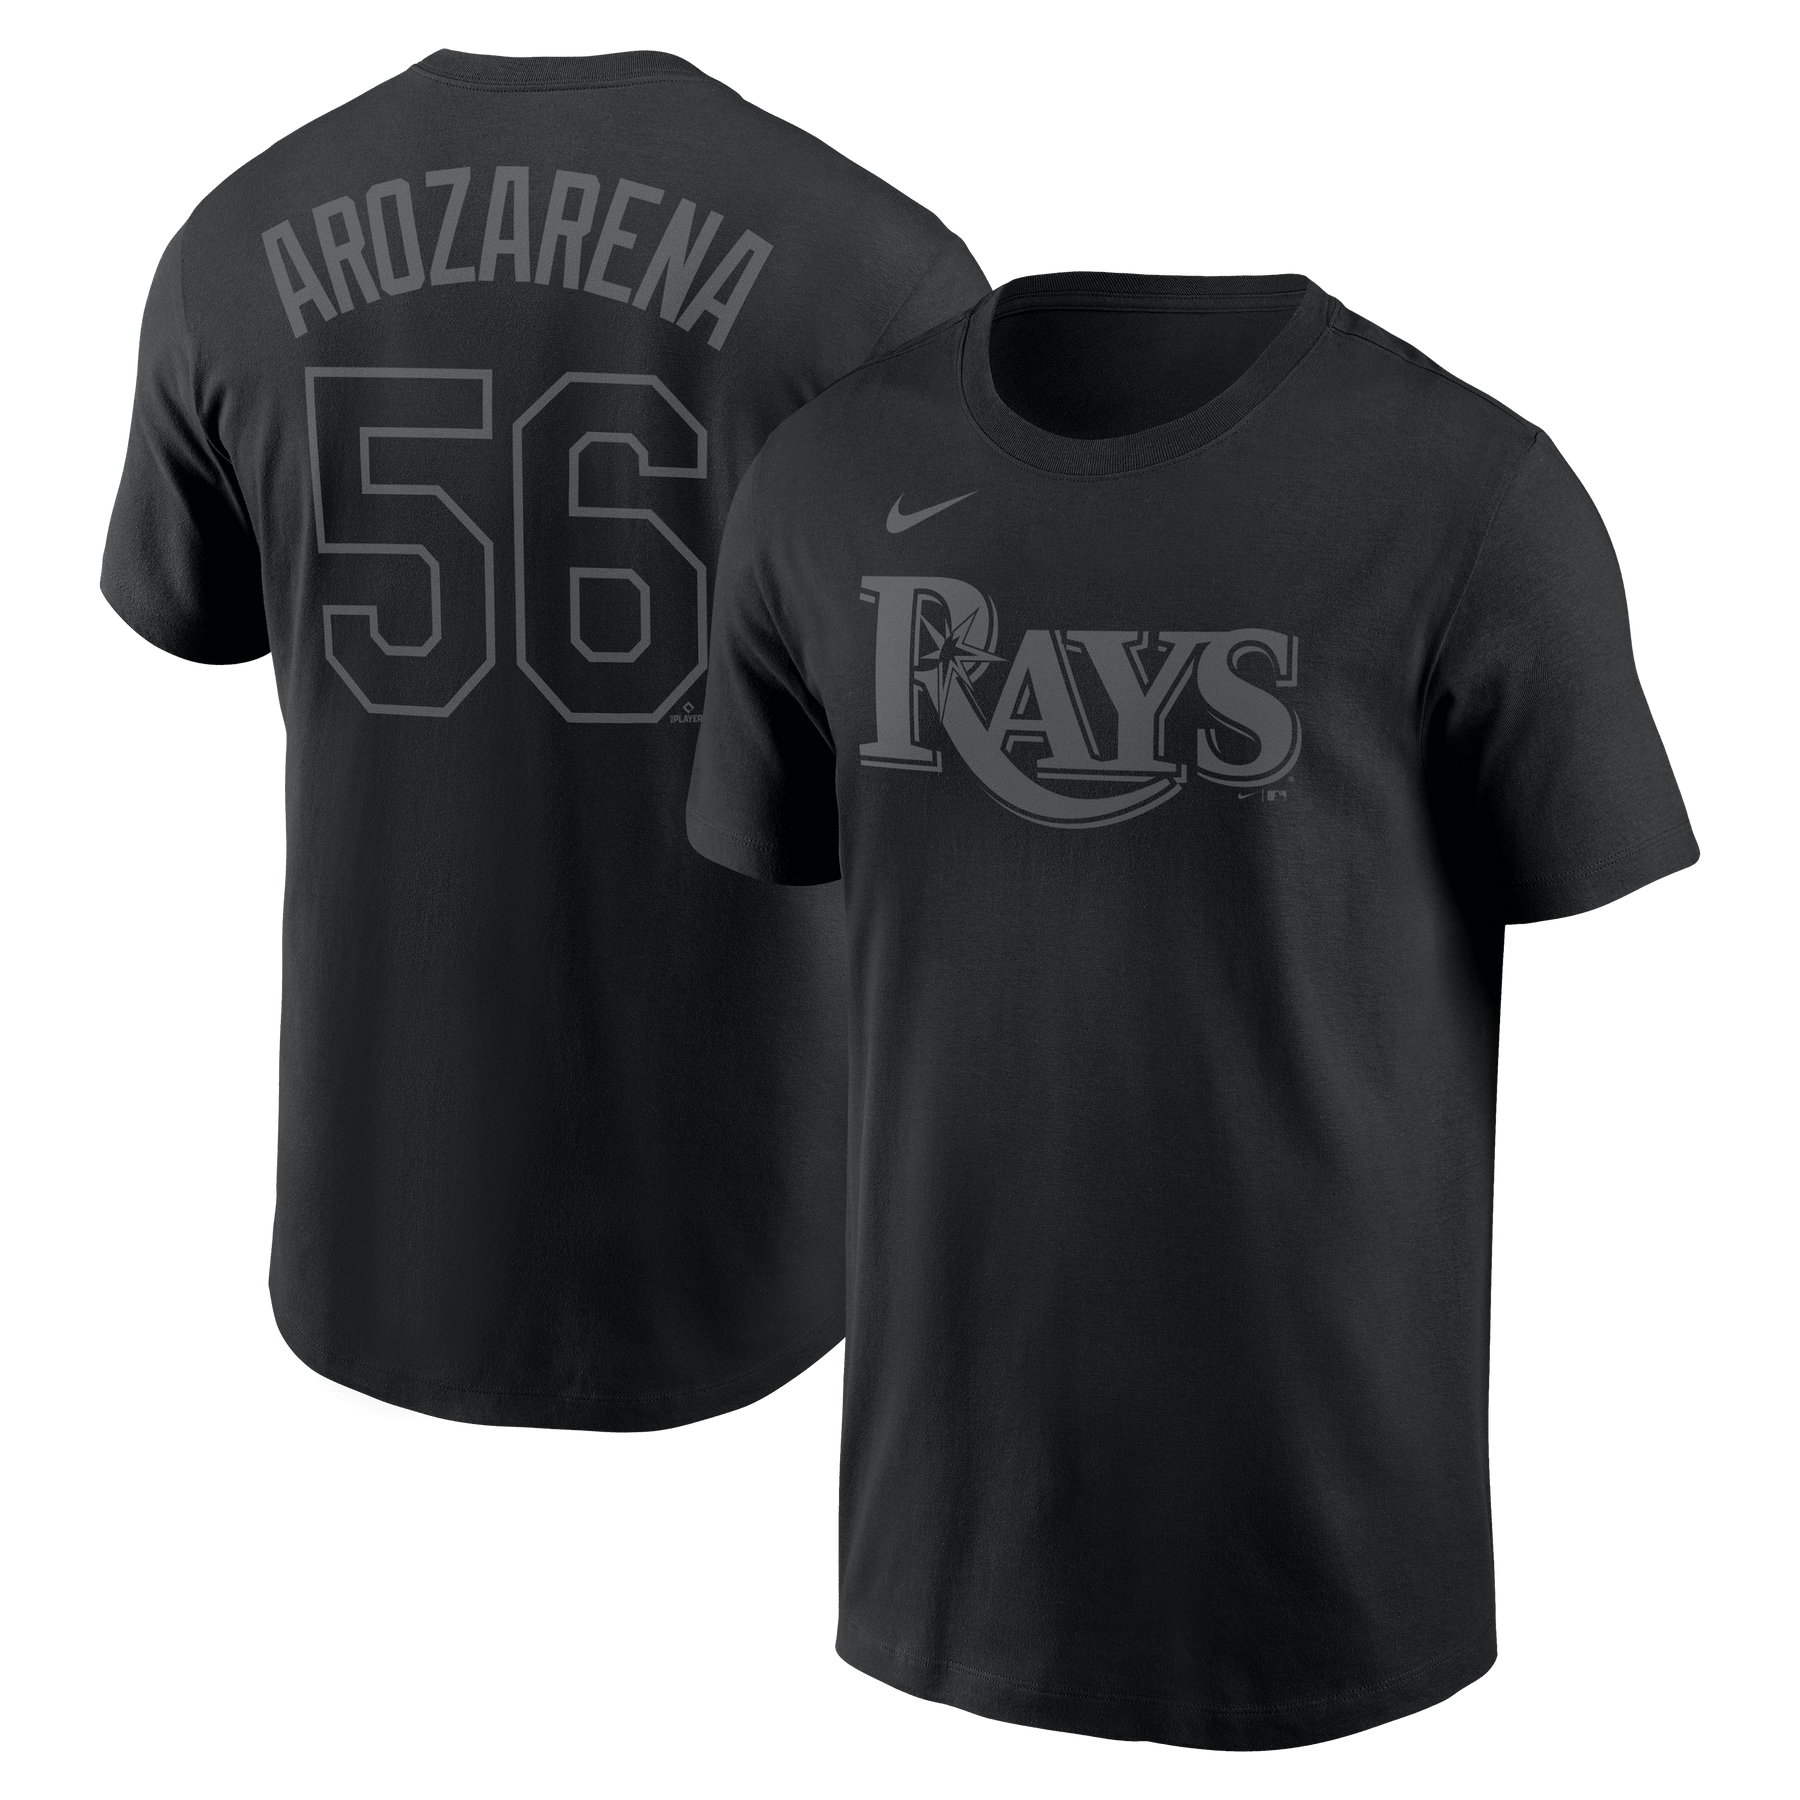 Another Rays Playoff shirt! — R.A.N.D.Y. Arozarena - DRaysBay